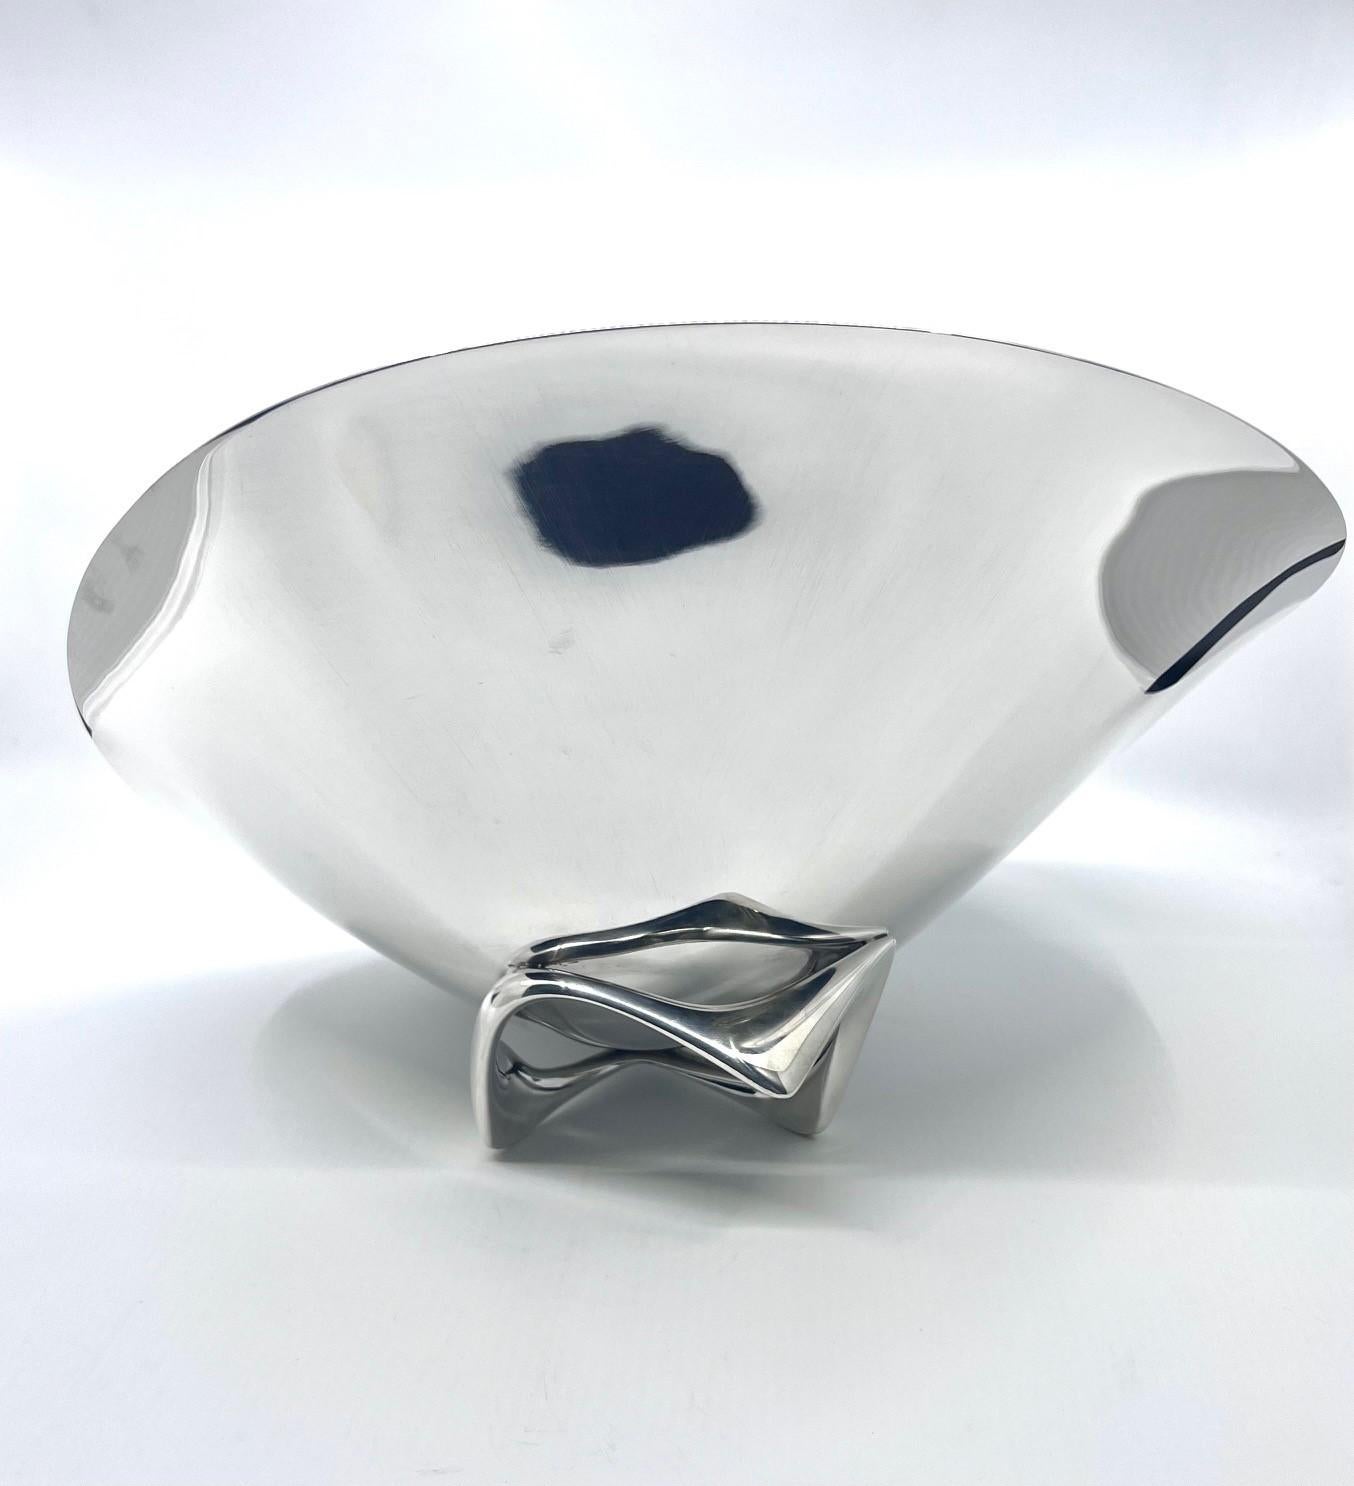 An early rare Mid-Century Georg Jensen sterling silver centerpiece bowl, design #980B by Henning Koppel. There are two sizes to this is design, and unlike the #980A which is still in production, there were very few of this slightly smaller #980B